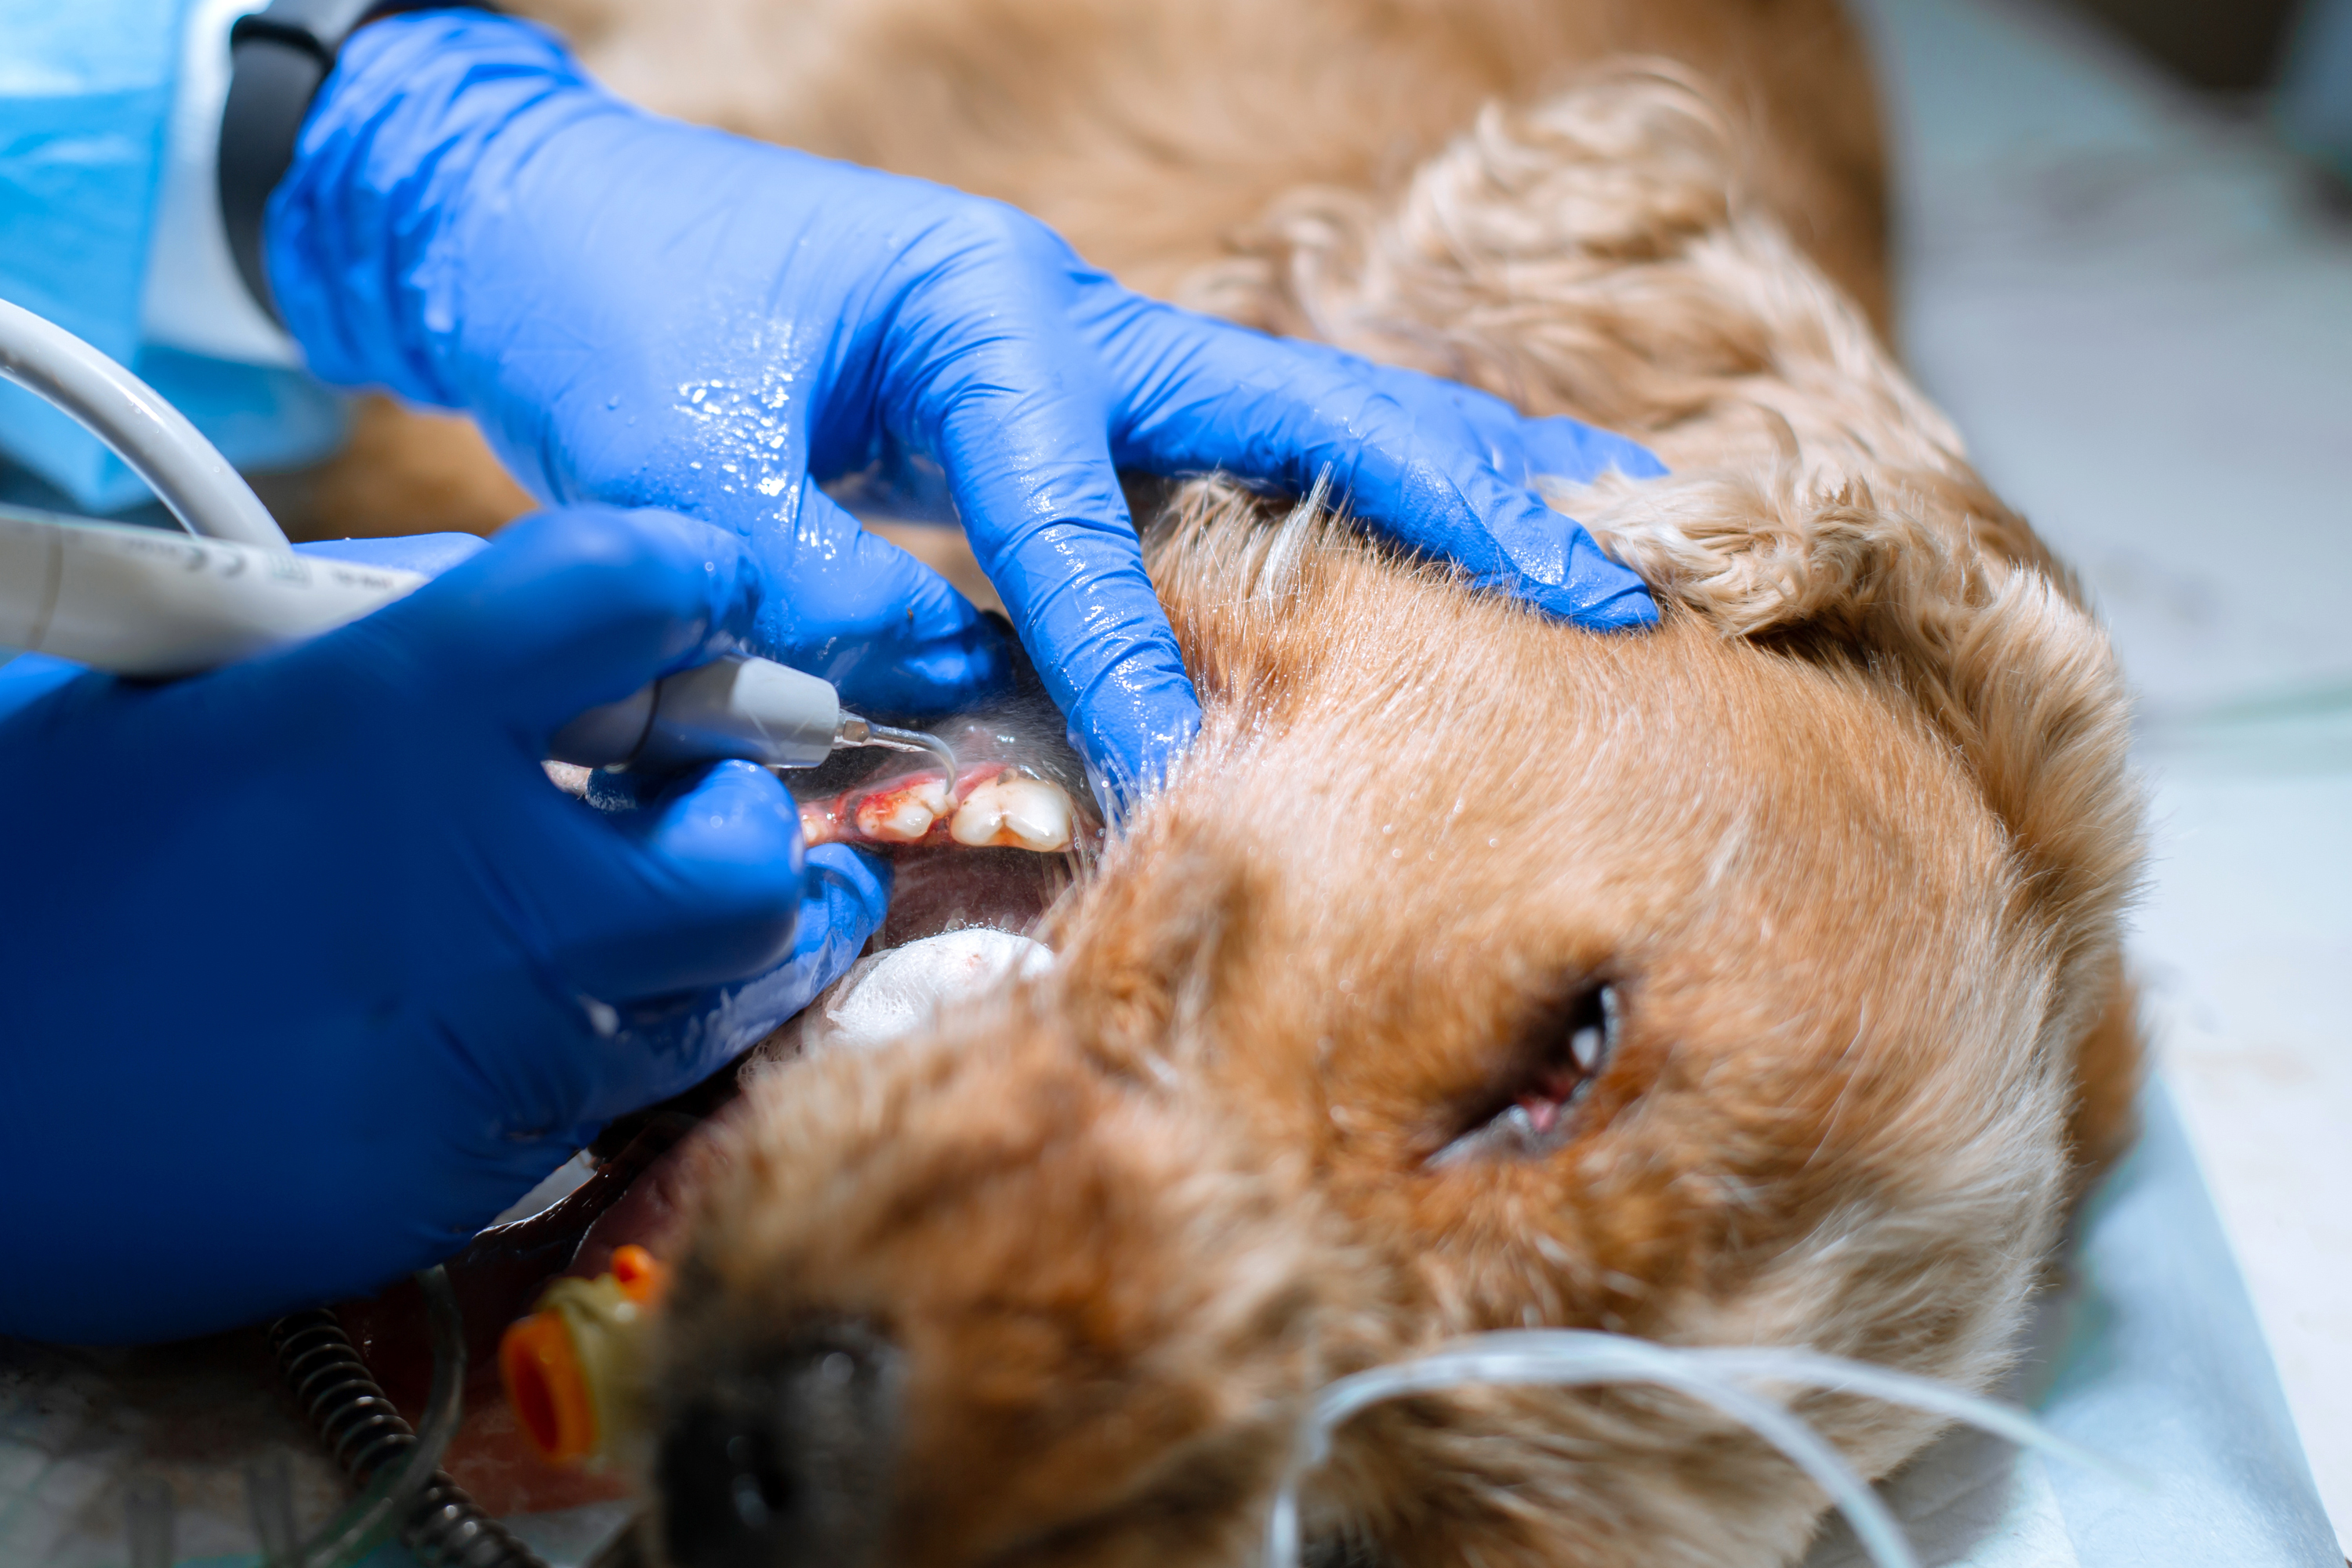 A Close-Up Image Of A Professional Dog Teeth Cleaning Procedure Being Performed On A Canine Patient